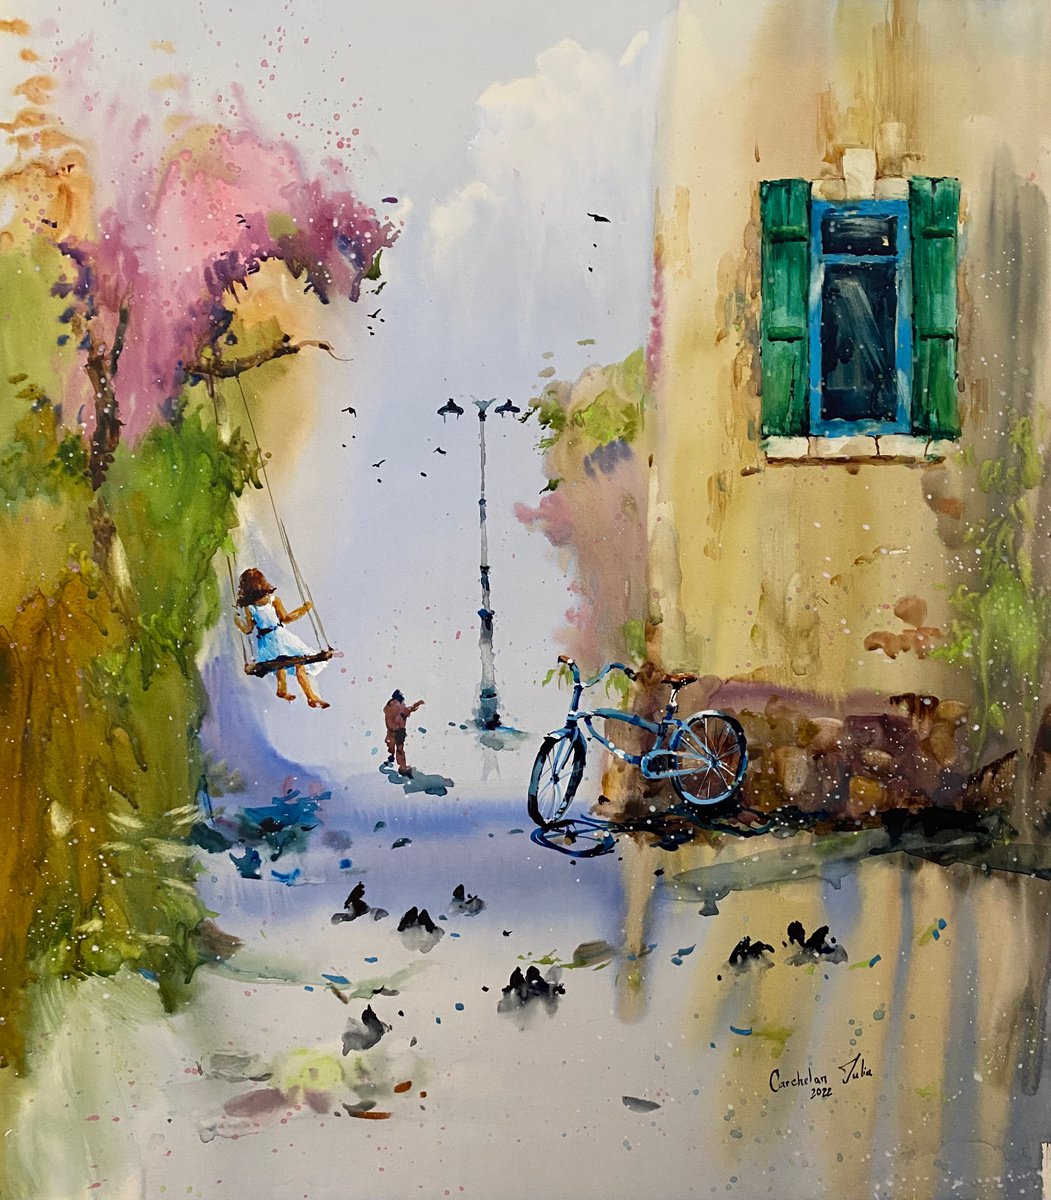 Watercolor Childhood Paradise, perfect gift by Iulia Carchelan